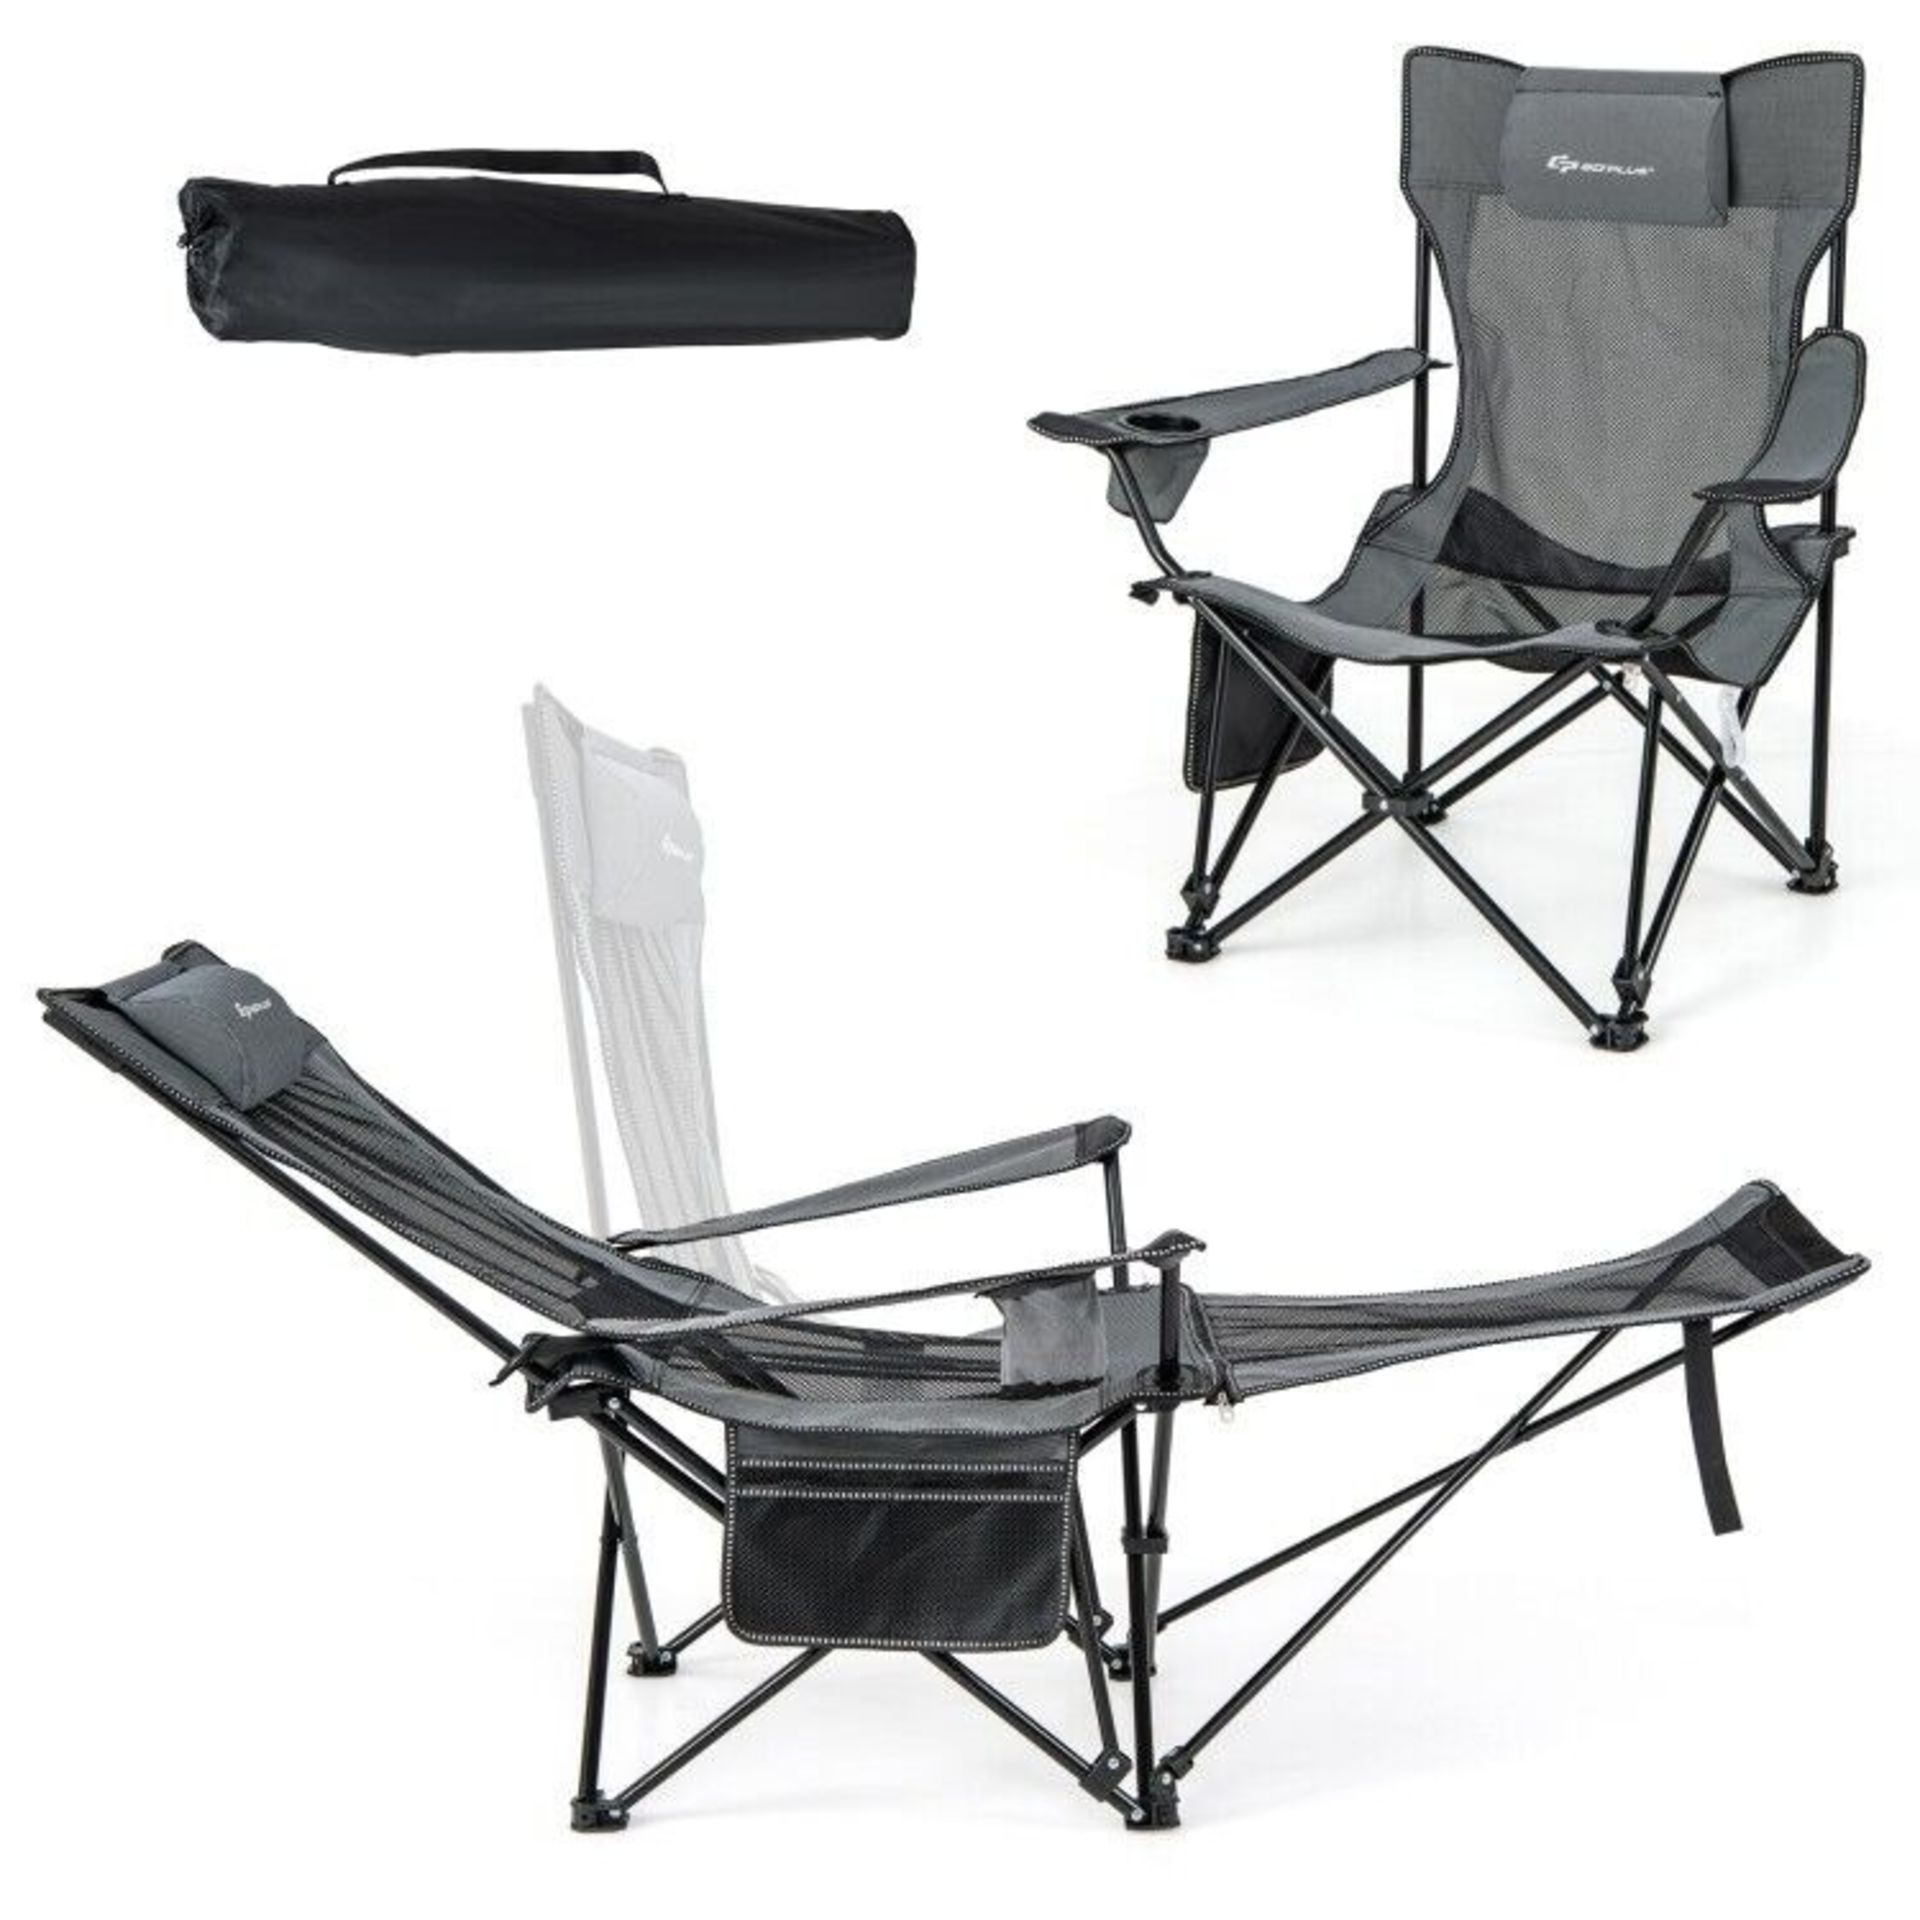 Camping Chaise Lounge Chair Folding Adjustable Backrest - ER53